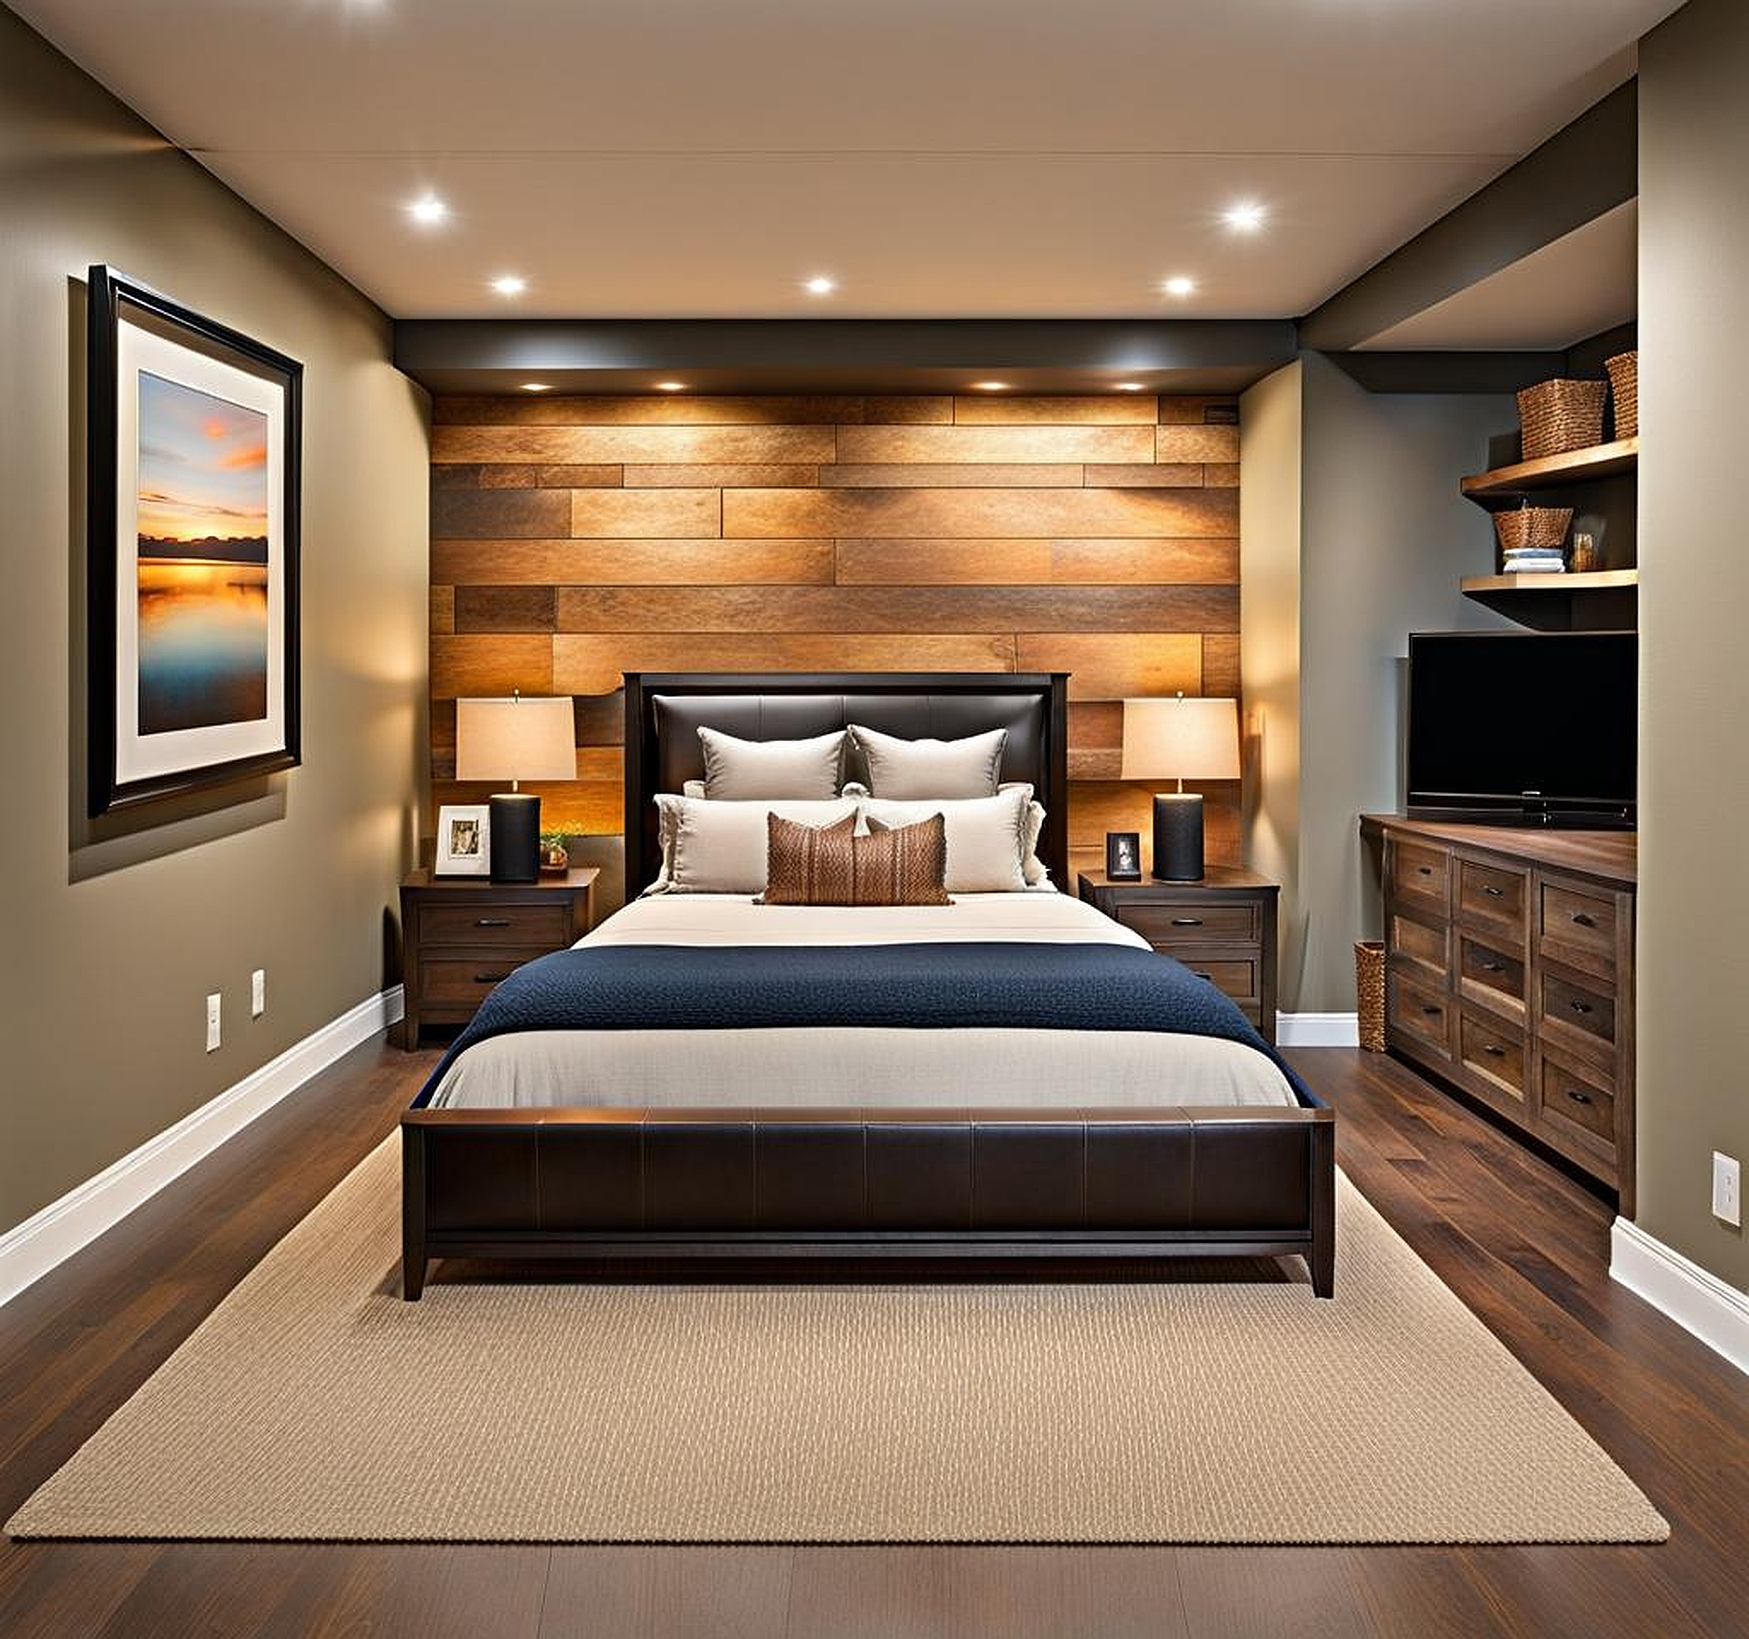 Basement Bedroom Ideas on a Budget for Small Spaces